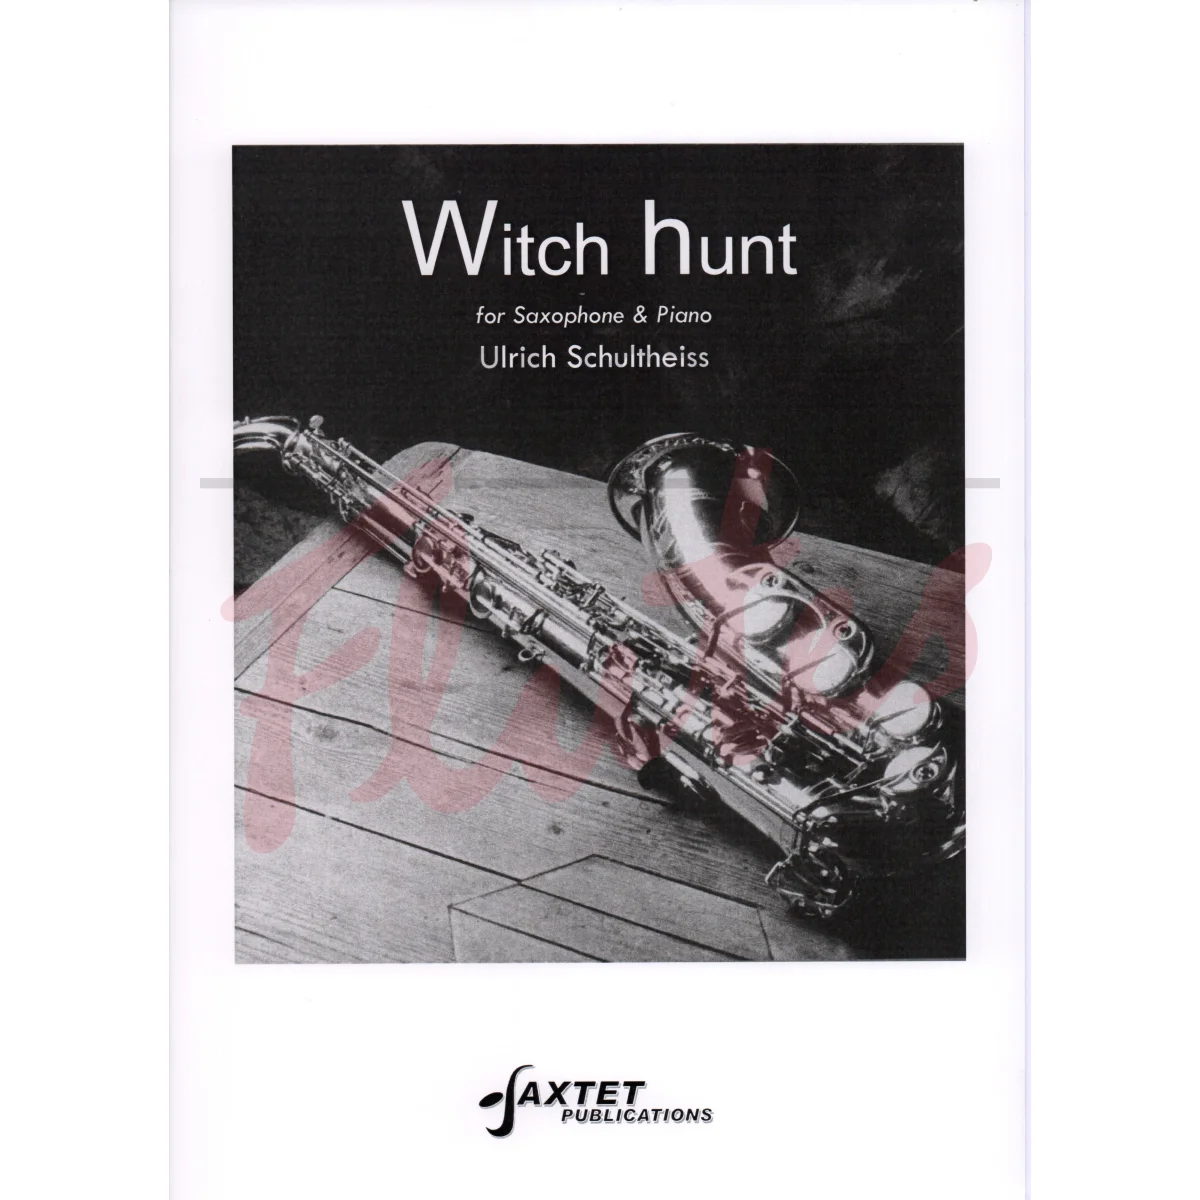 Witch Hunt for Saxophone and Piano